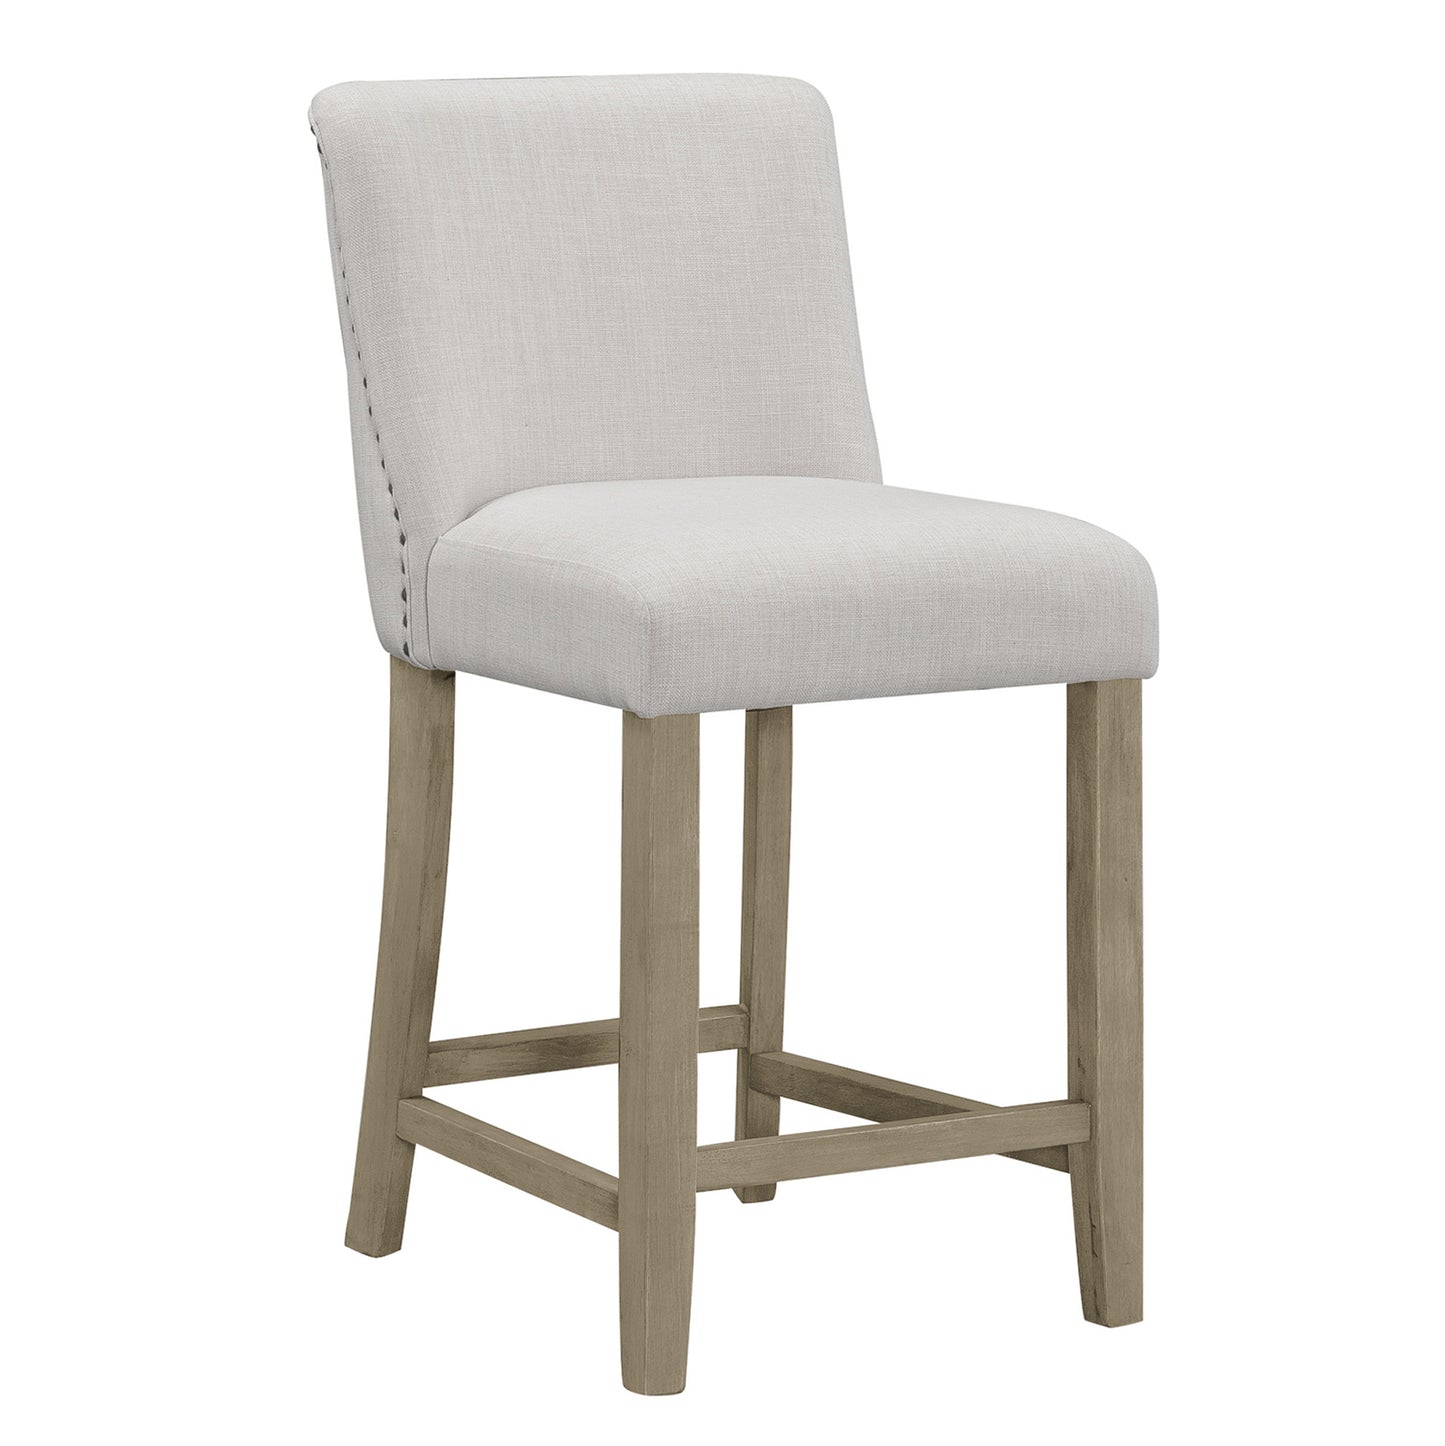 Set of 2 Aleco Beige Fabric Counter Stool with Metal Nail Head Accents